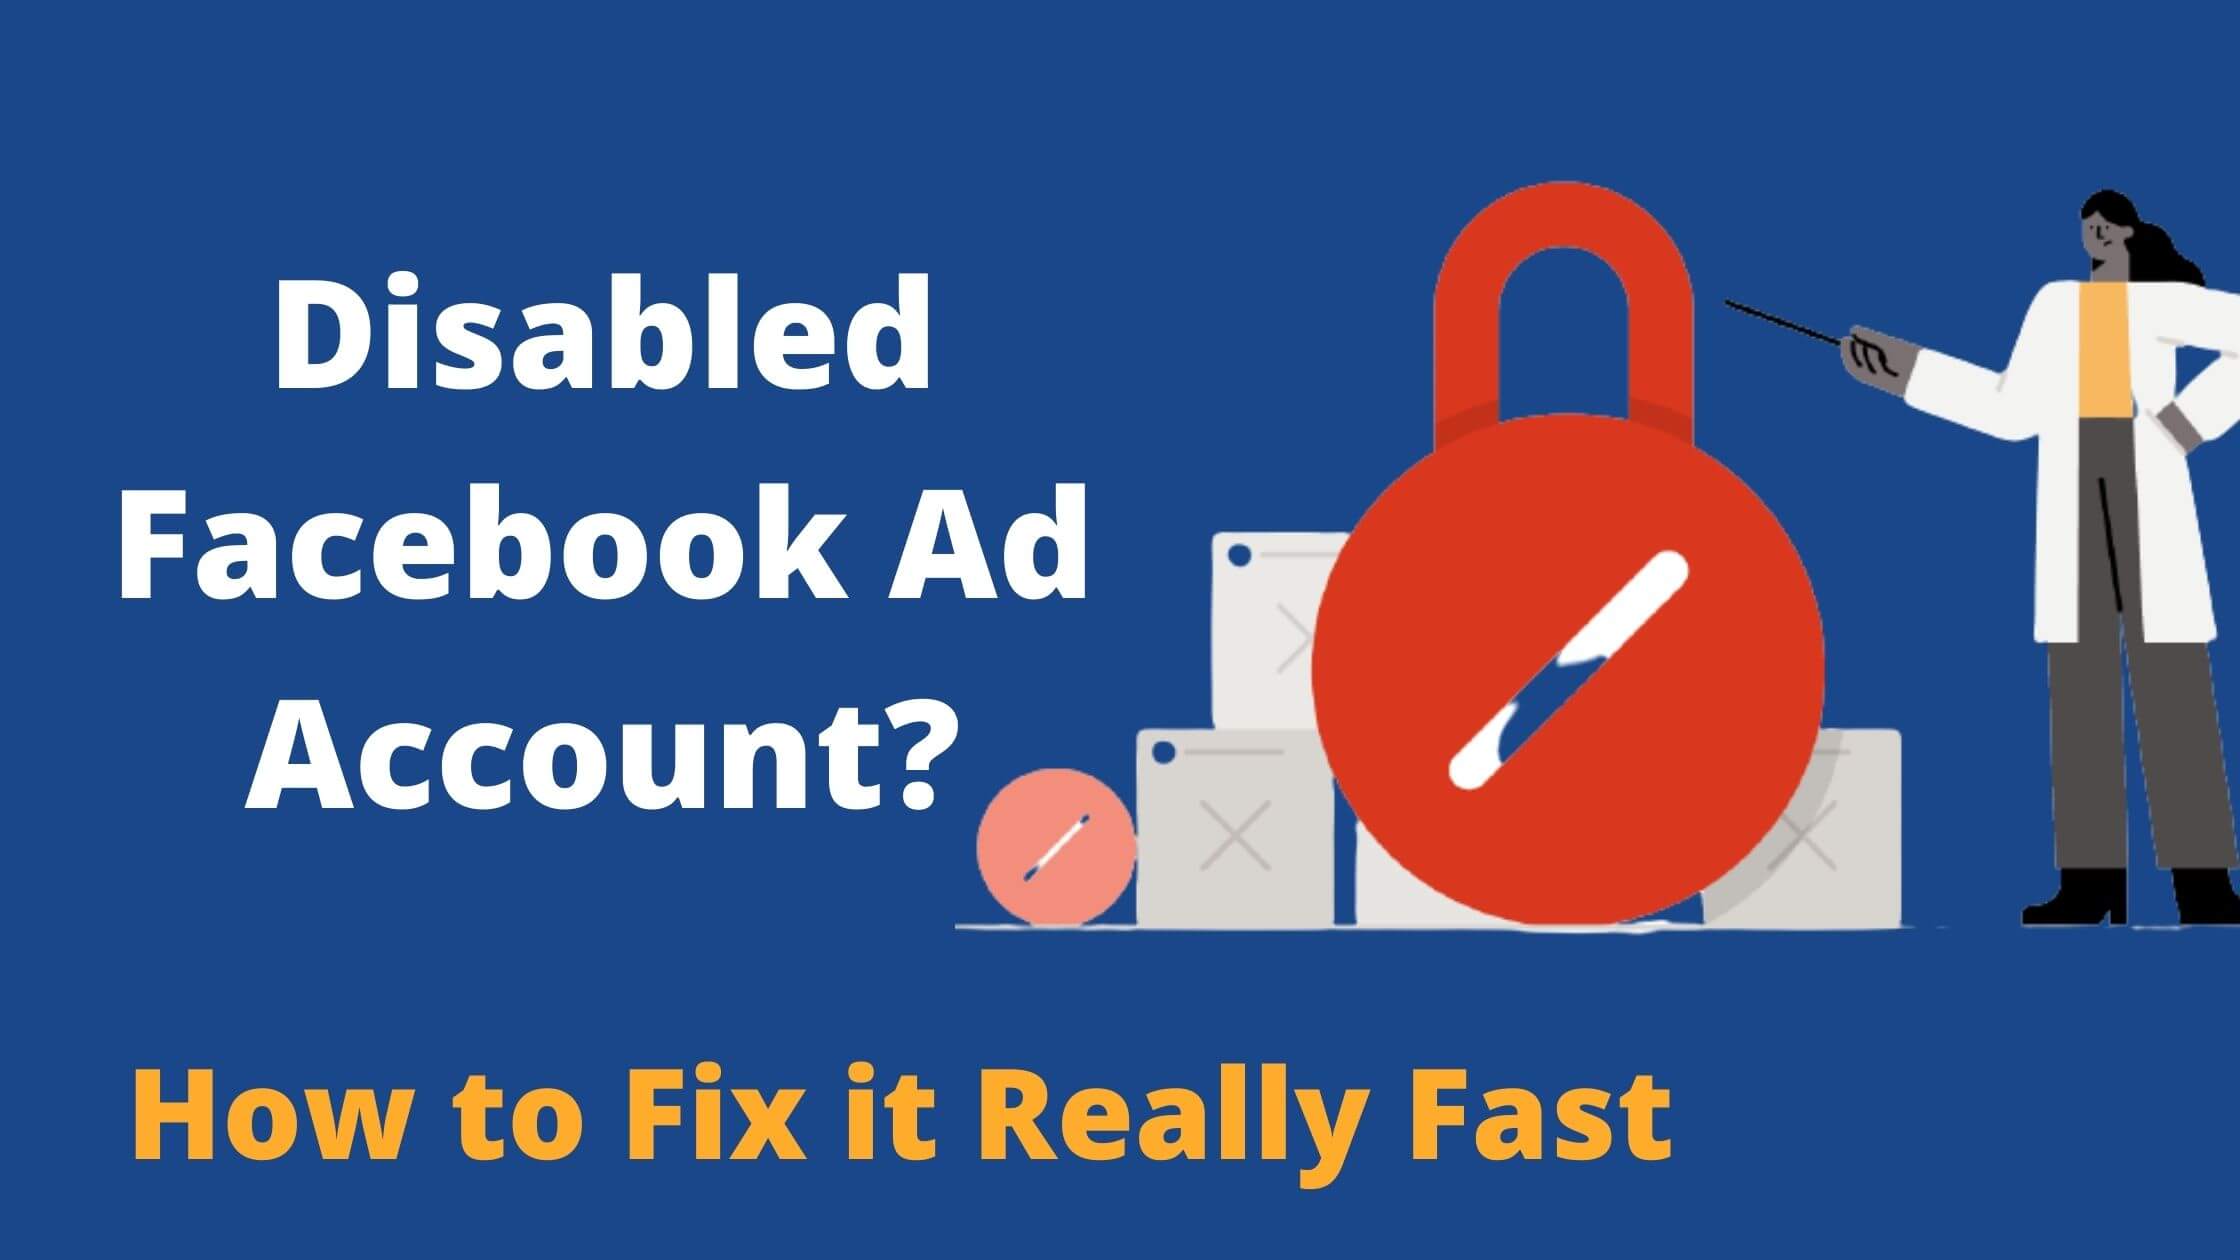 How to fix Facebook disabled ad account